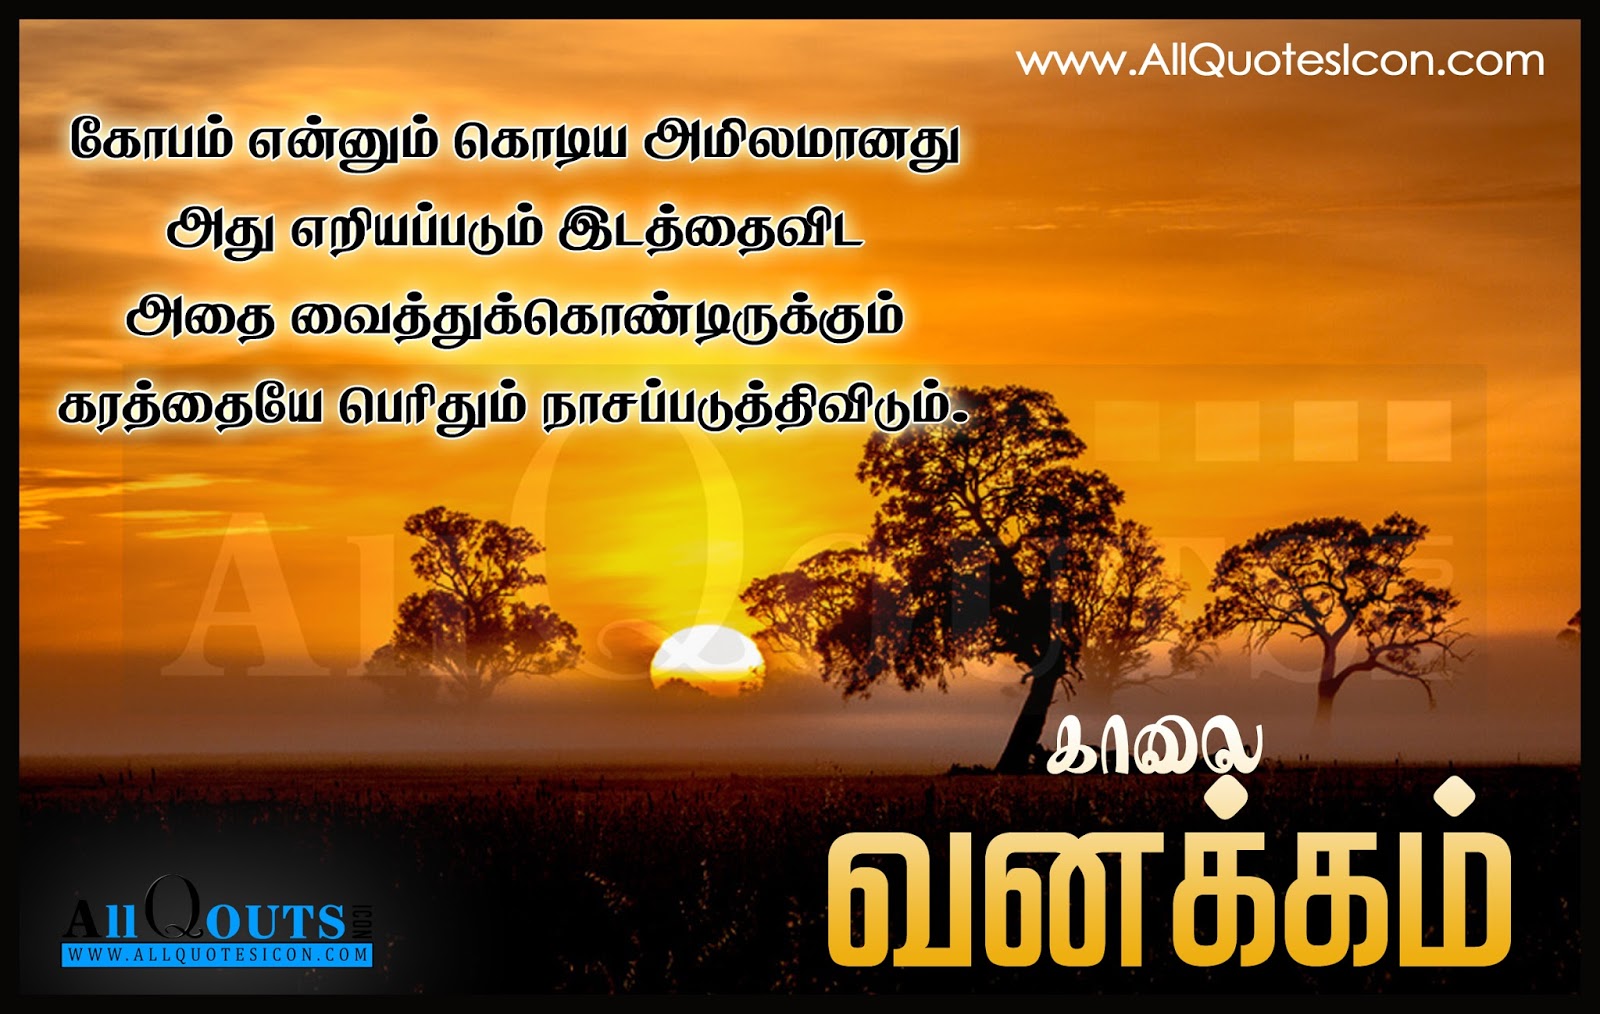 tamil wallpaper quotes,sky,natural landscape,text,morning,sunrise